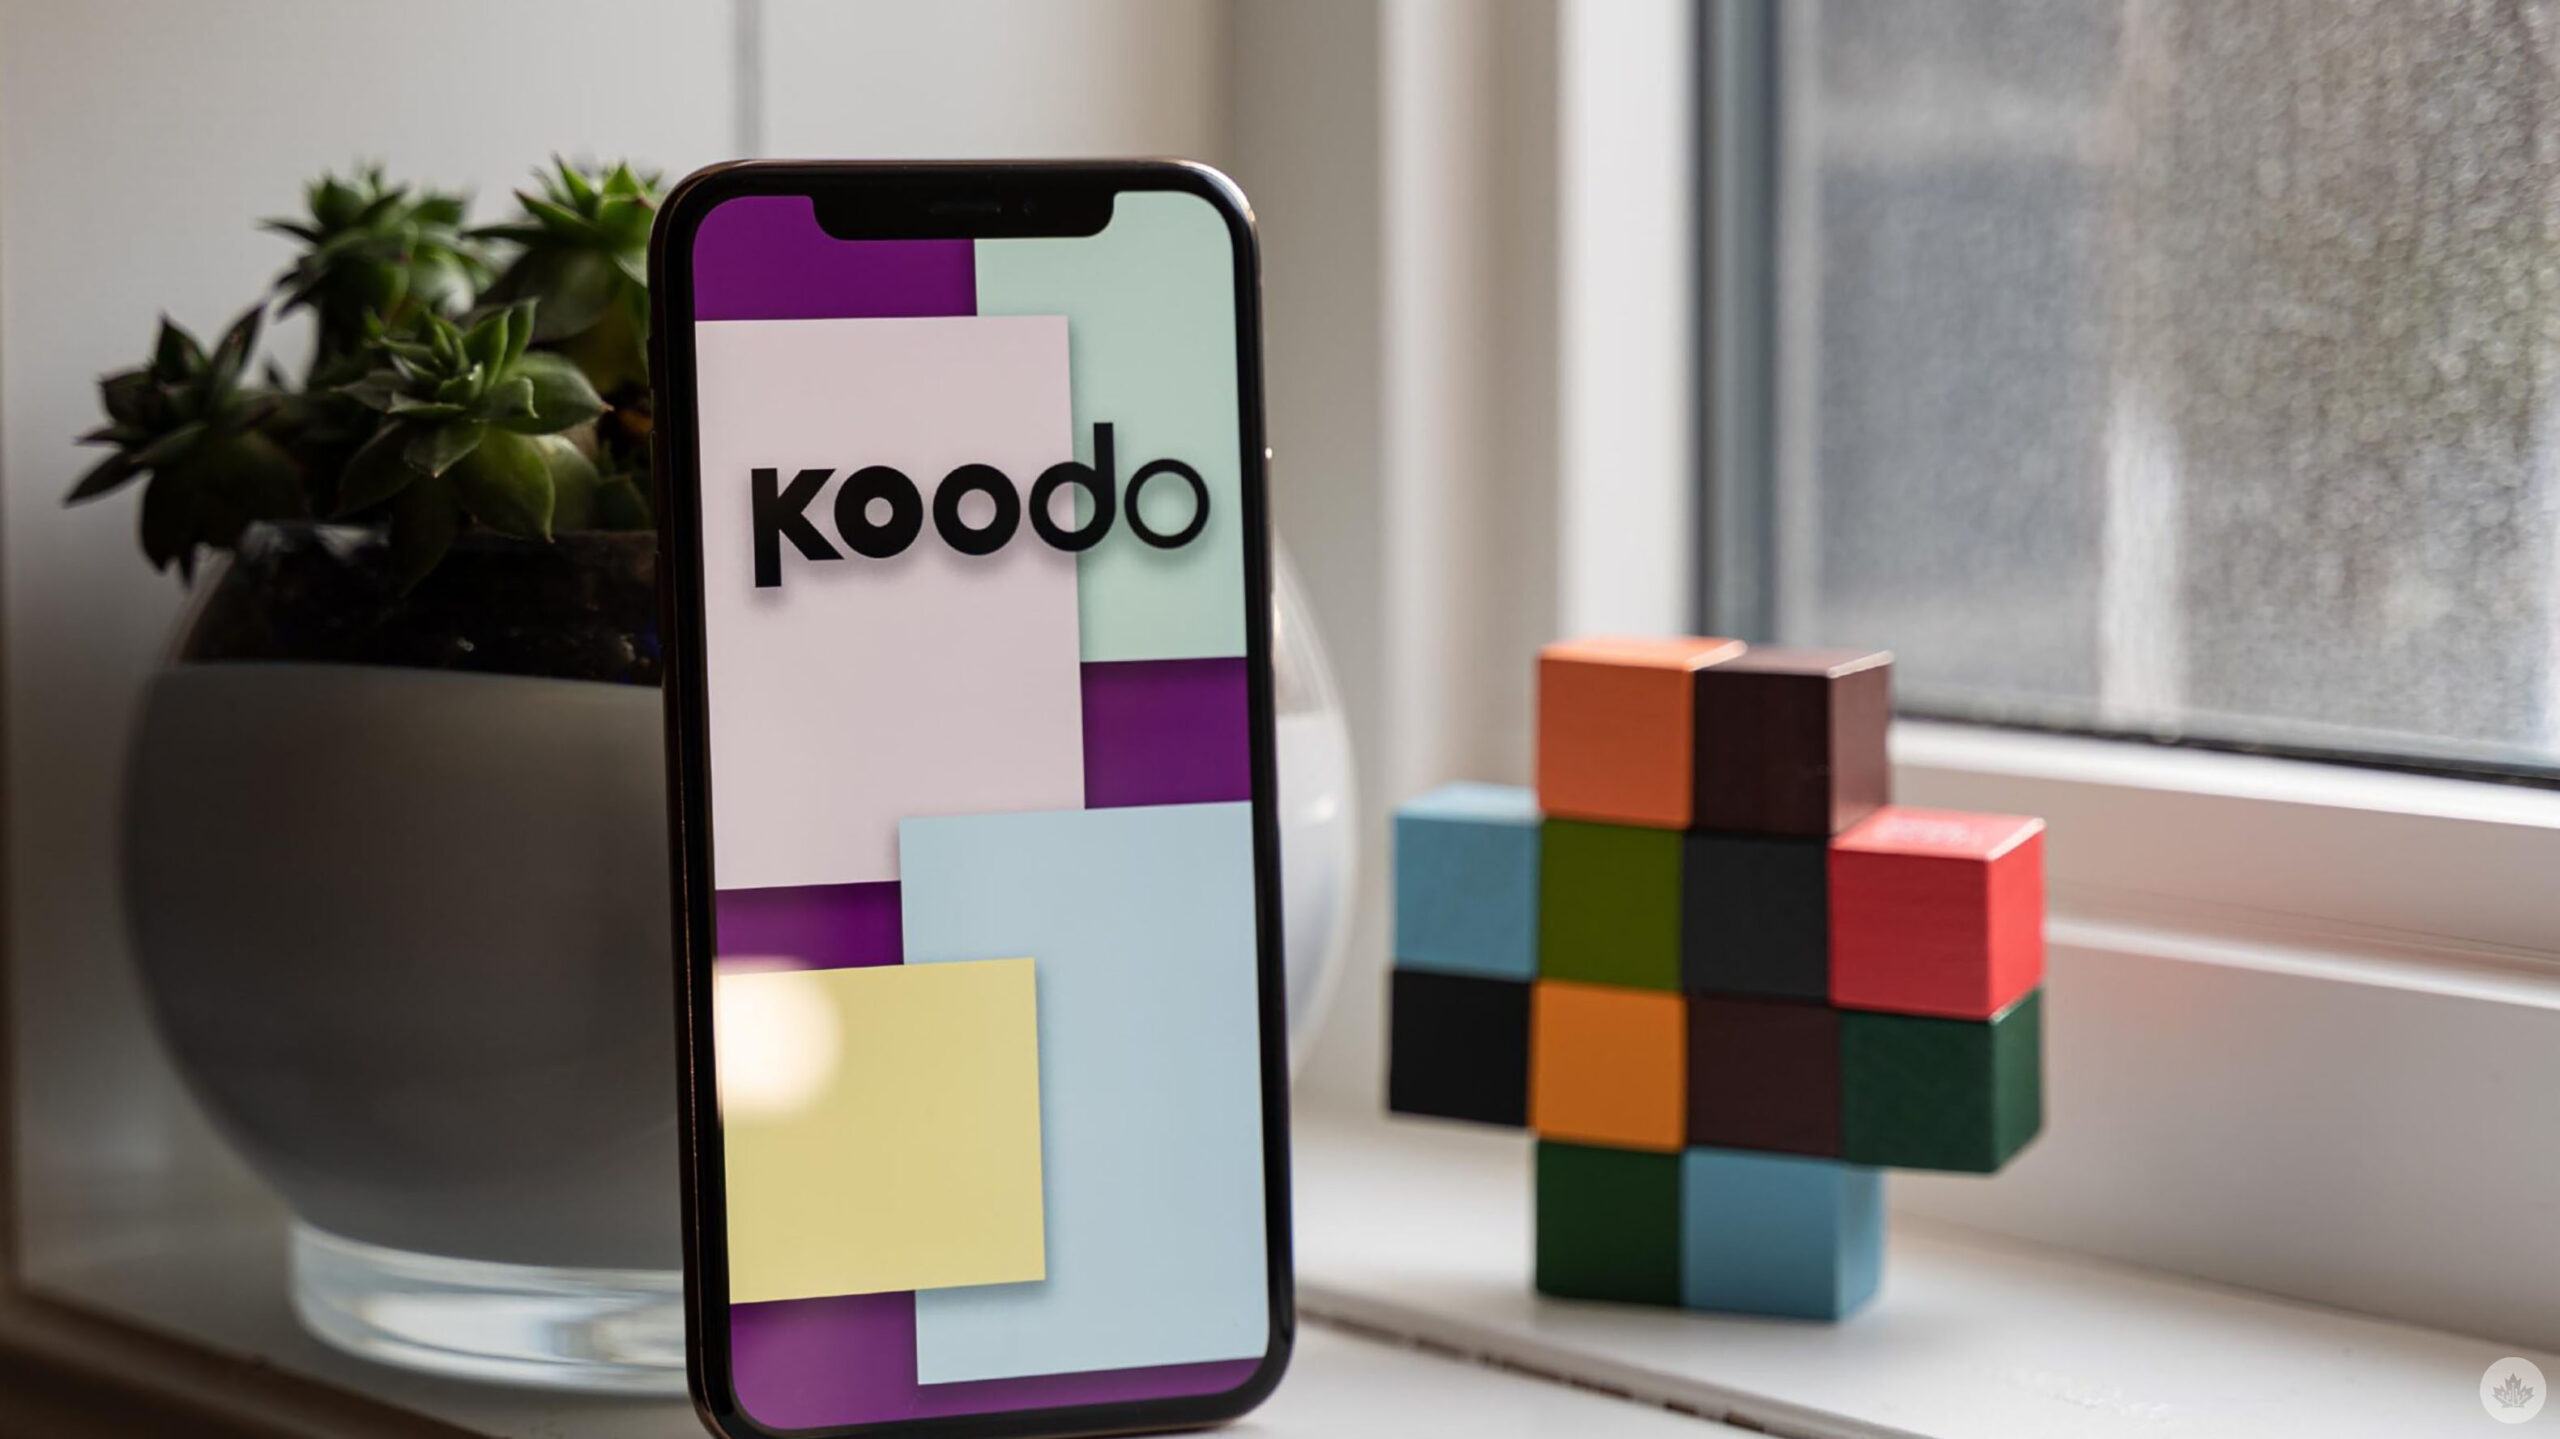 Koodo is launching three home internet plans for $65 per month in select provinces